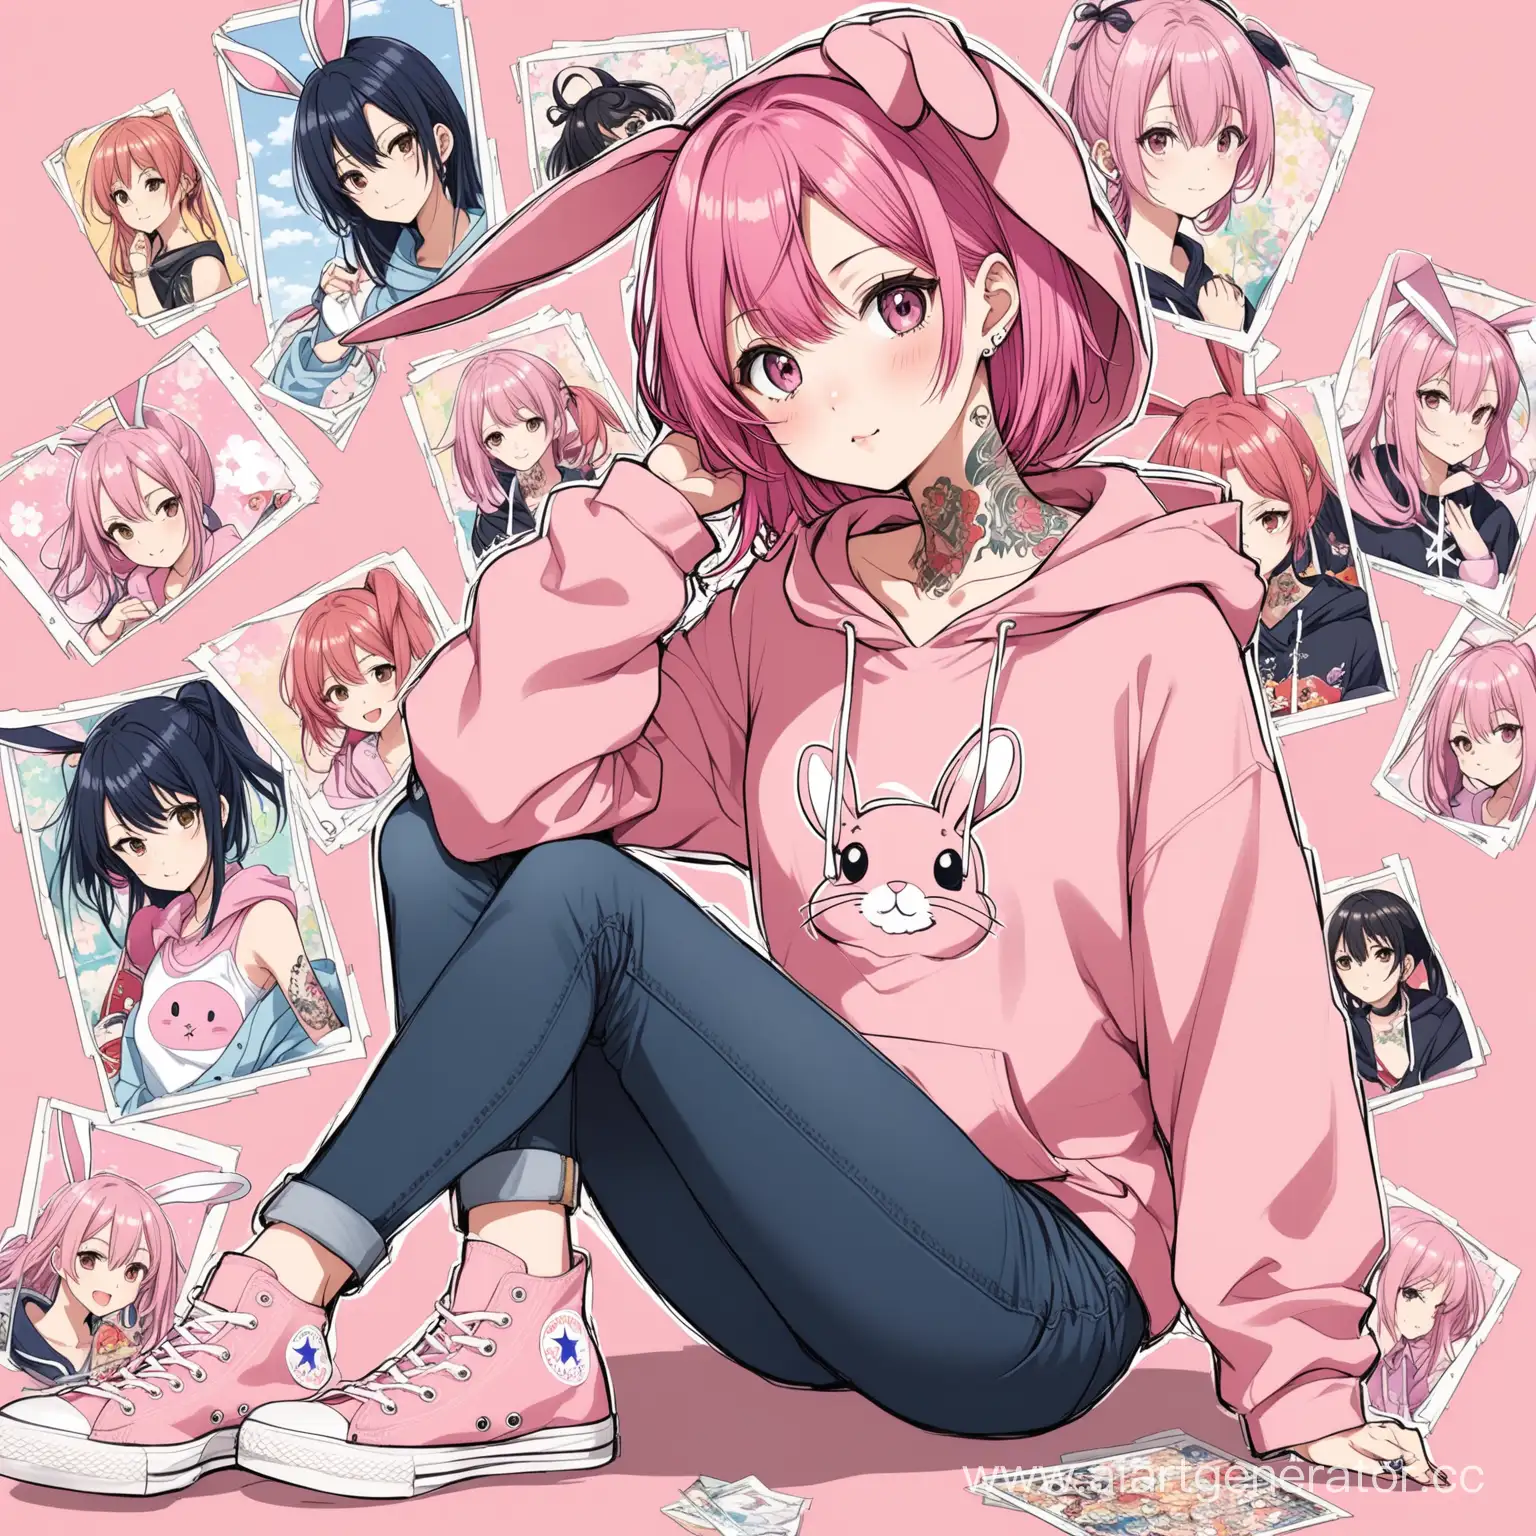 A Japanese girl with pink hair who looks about 19 years old, dressed in a pink hoodie with an anime bunny pattern, dark jeans and converse, anime style tattoo on her neck